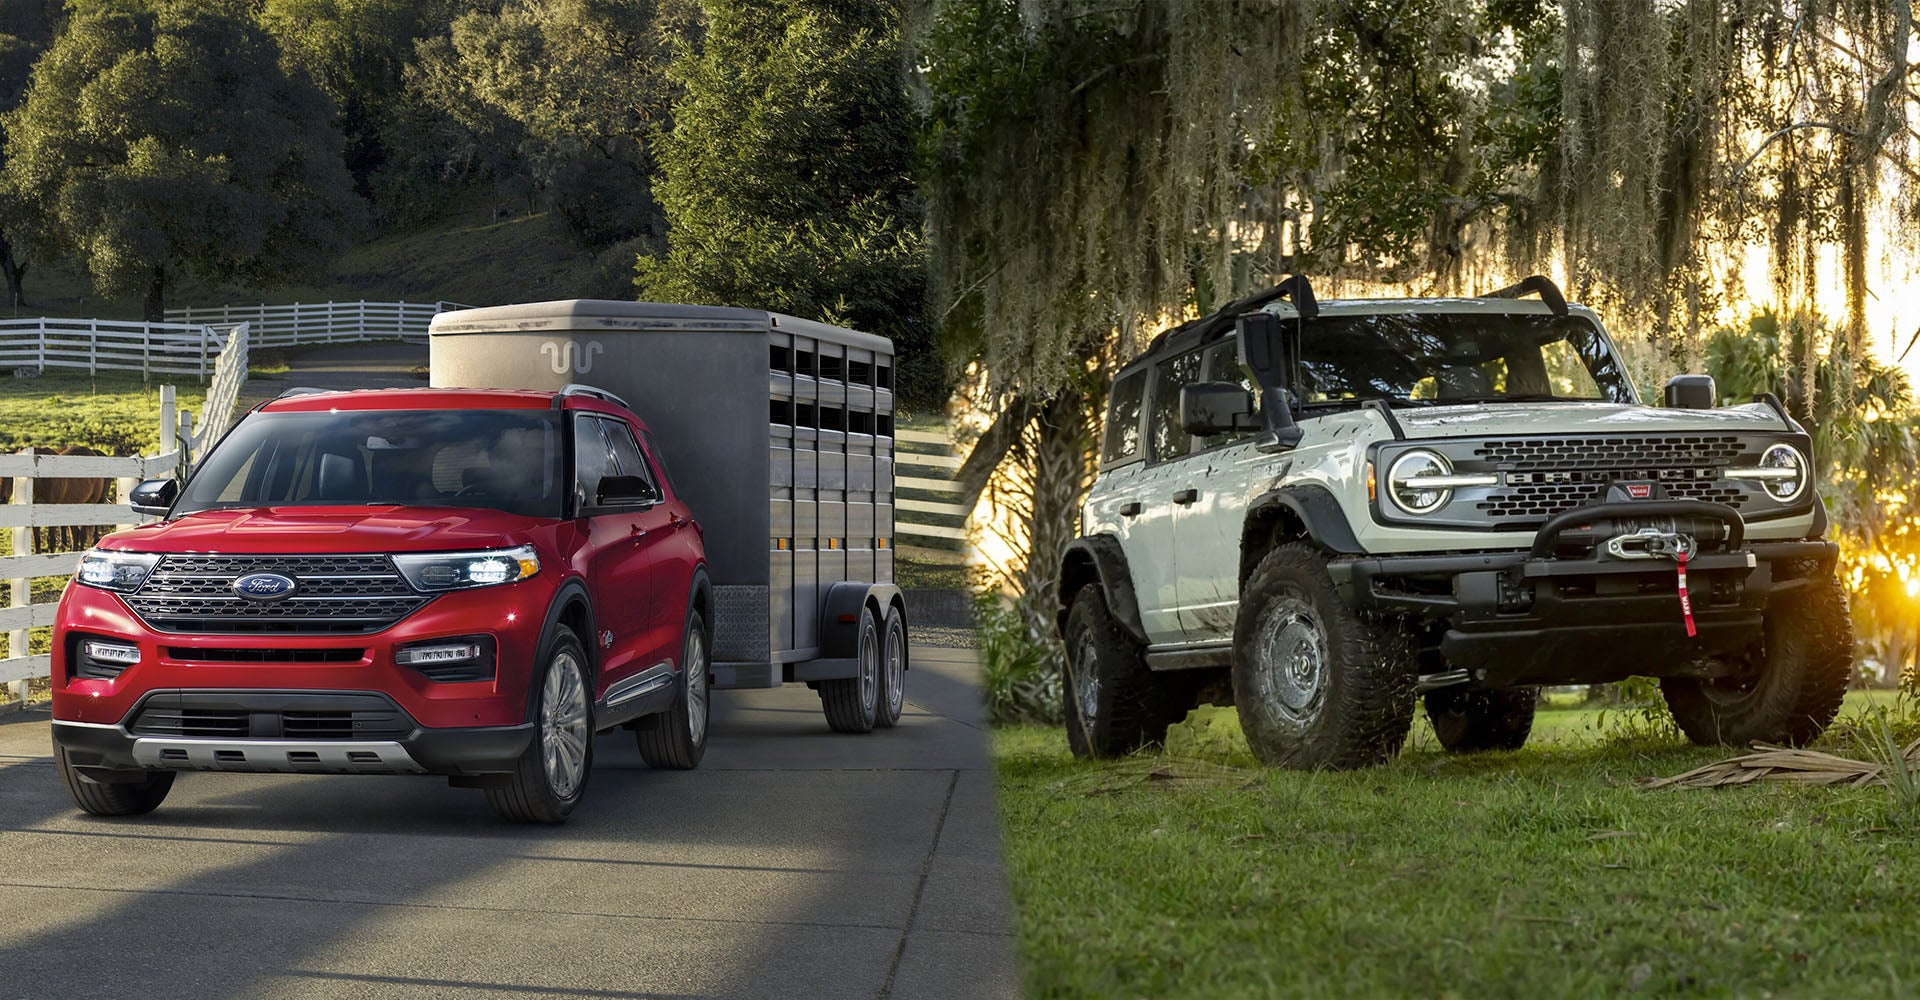 Ford SUVs Towing Capacity